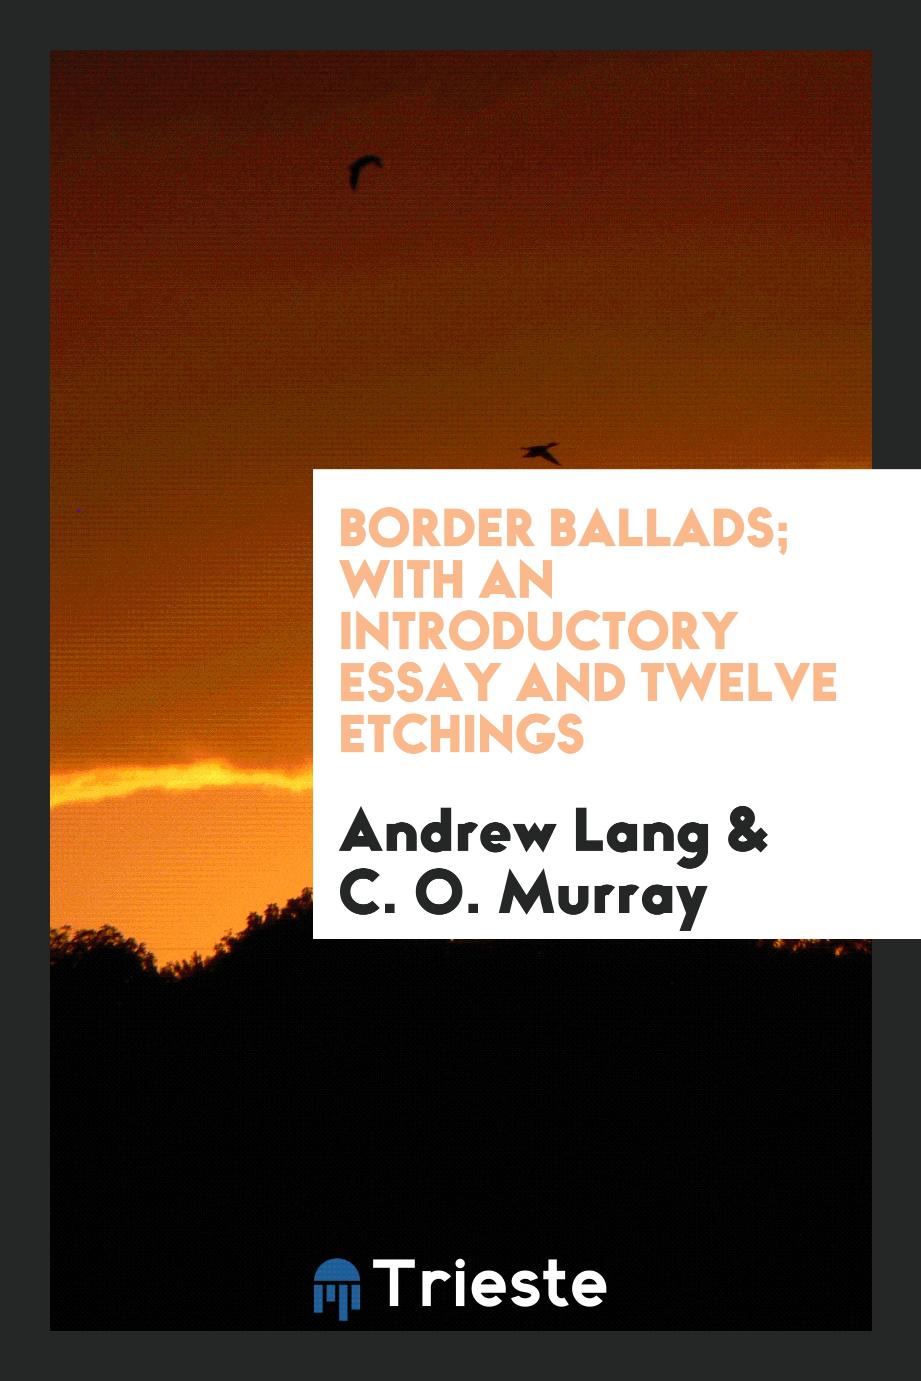 Border Ballads; With an Introductory Essay and Twelve Etchings